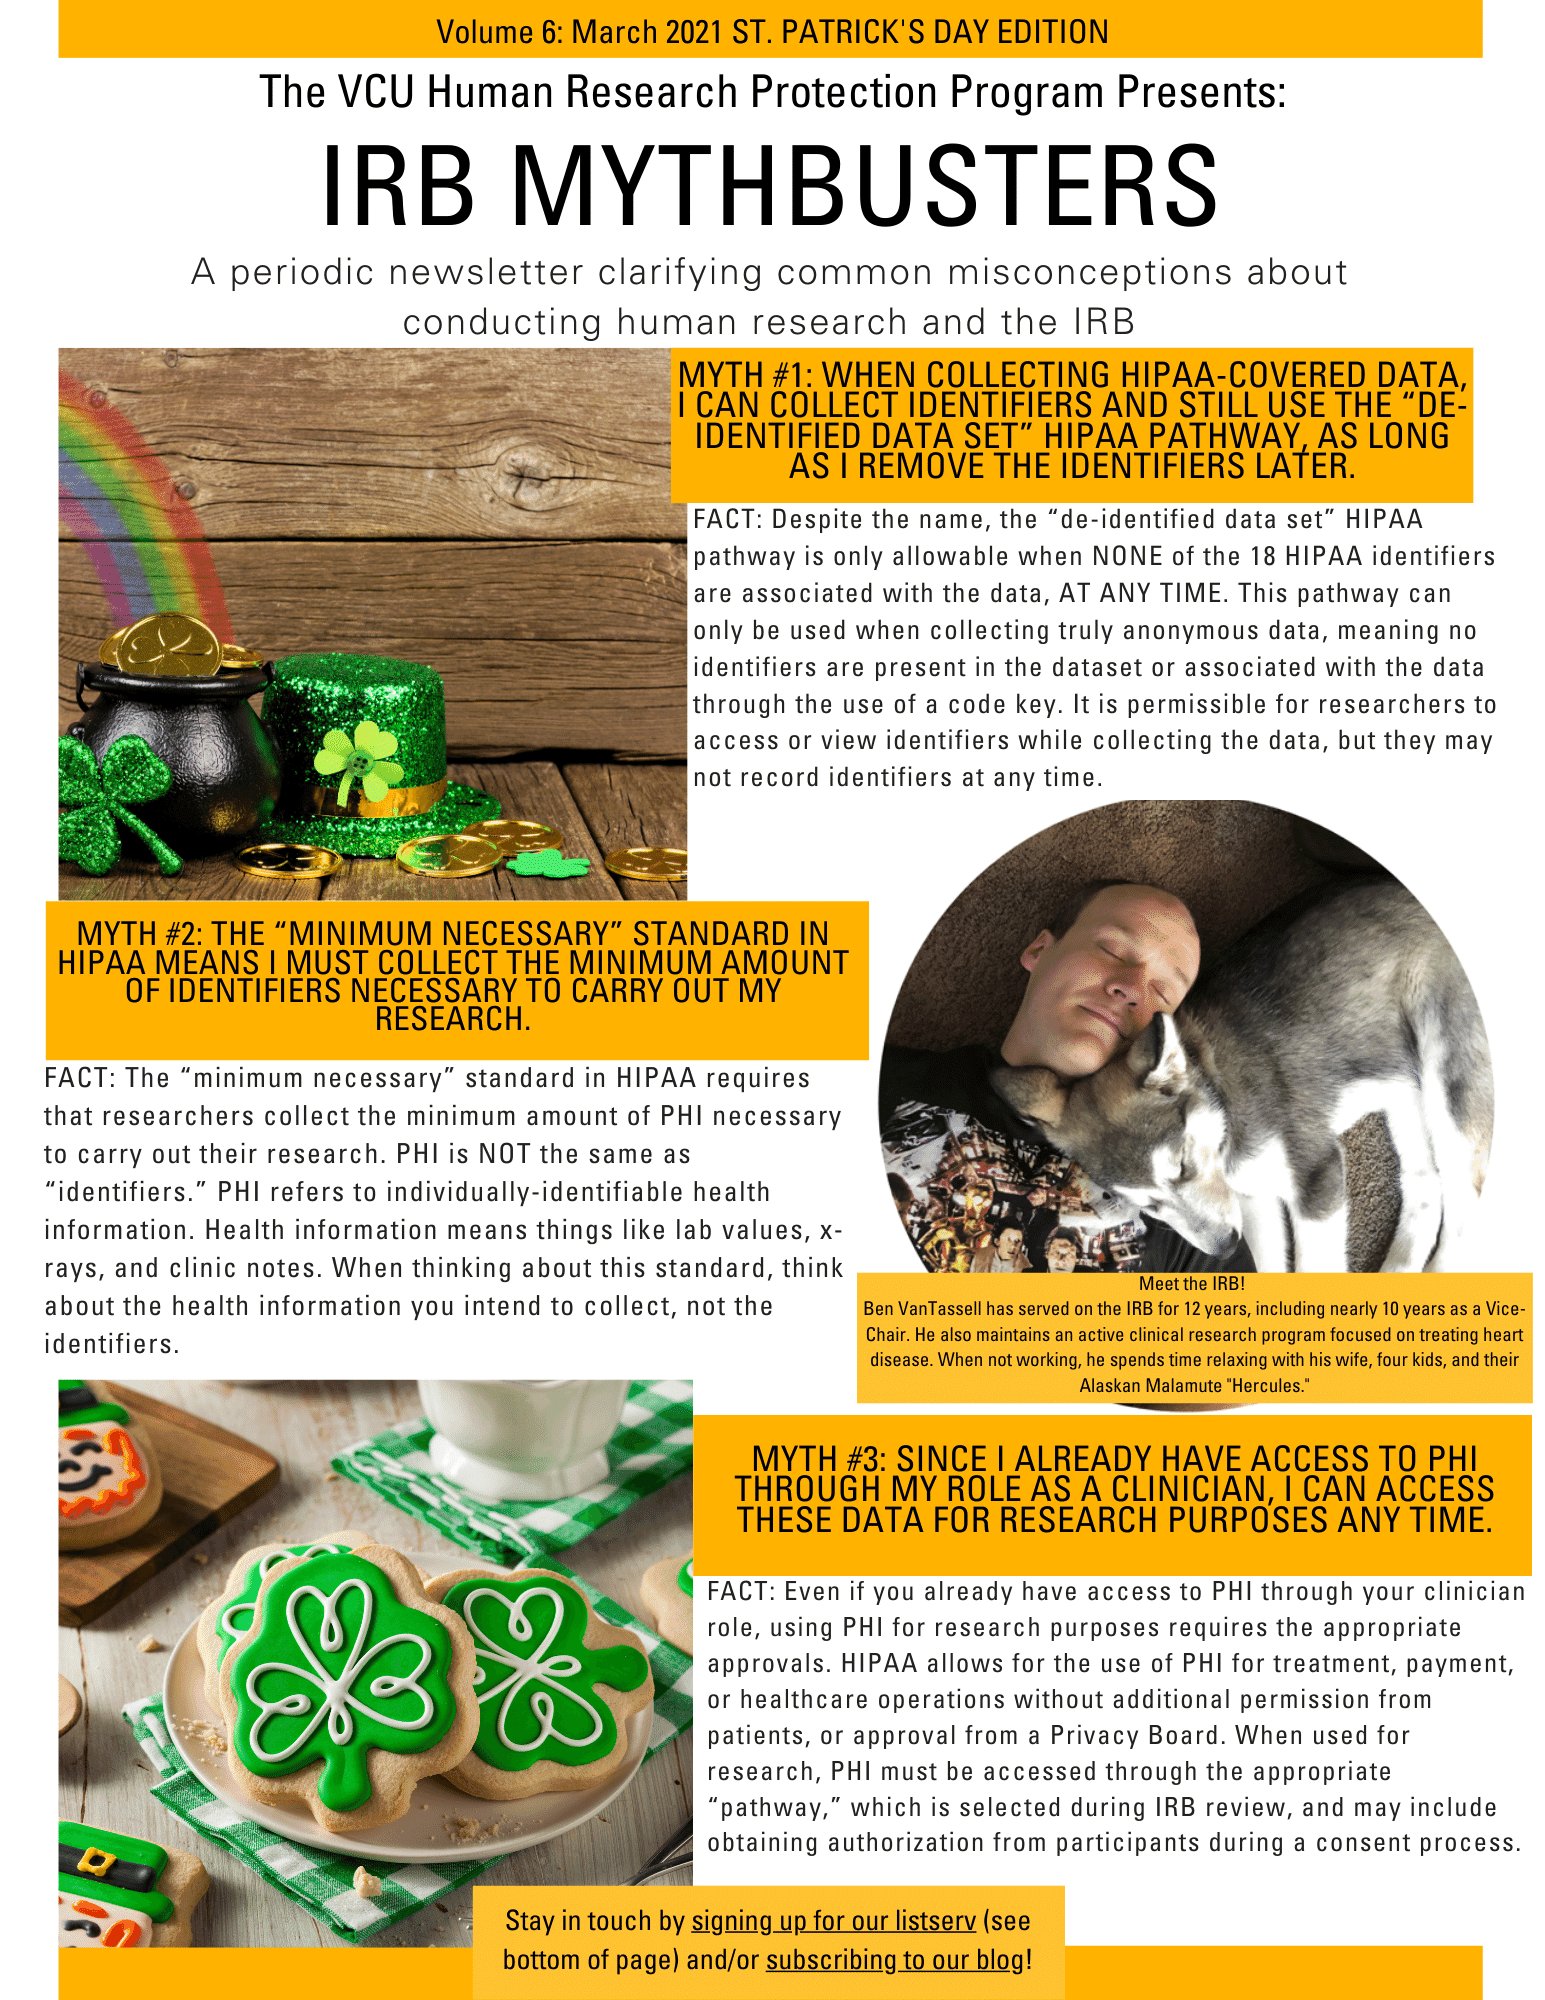 This is an image of the IRB Mythbusters Newsletter. It includes two St. Patrick's-themed images, and a third image, which shows a man laying with his eyes closed next to a gray and white dog, with the dog's head resting on the man's shoulder. The caption to that picture says “Meet the IRB! Ben VanTassell has served on the IRB for 12 years, including nearly 10 years as a Vice-Chair. He also maintains an active clinical research program focused on treating heart disease. When not working, he spends his time relaxing with his wife, four kids, and their Alaskan Malamute, 'Hercules'.” The rest of the newsletter contains the same myths and facts as the blog post